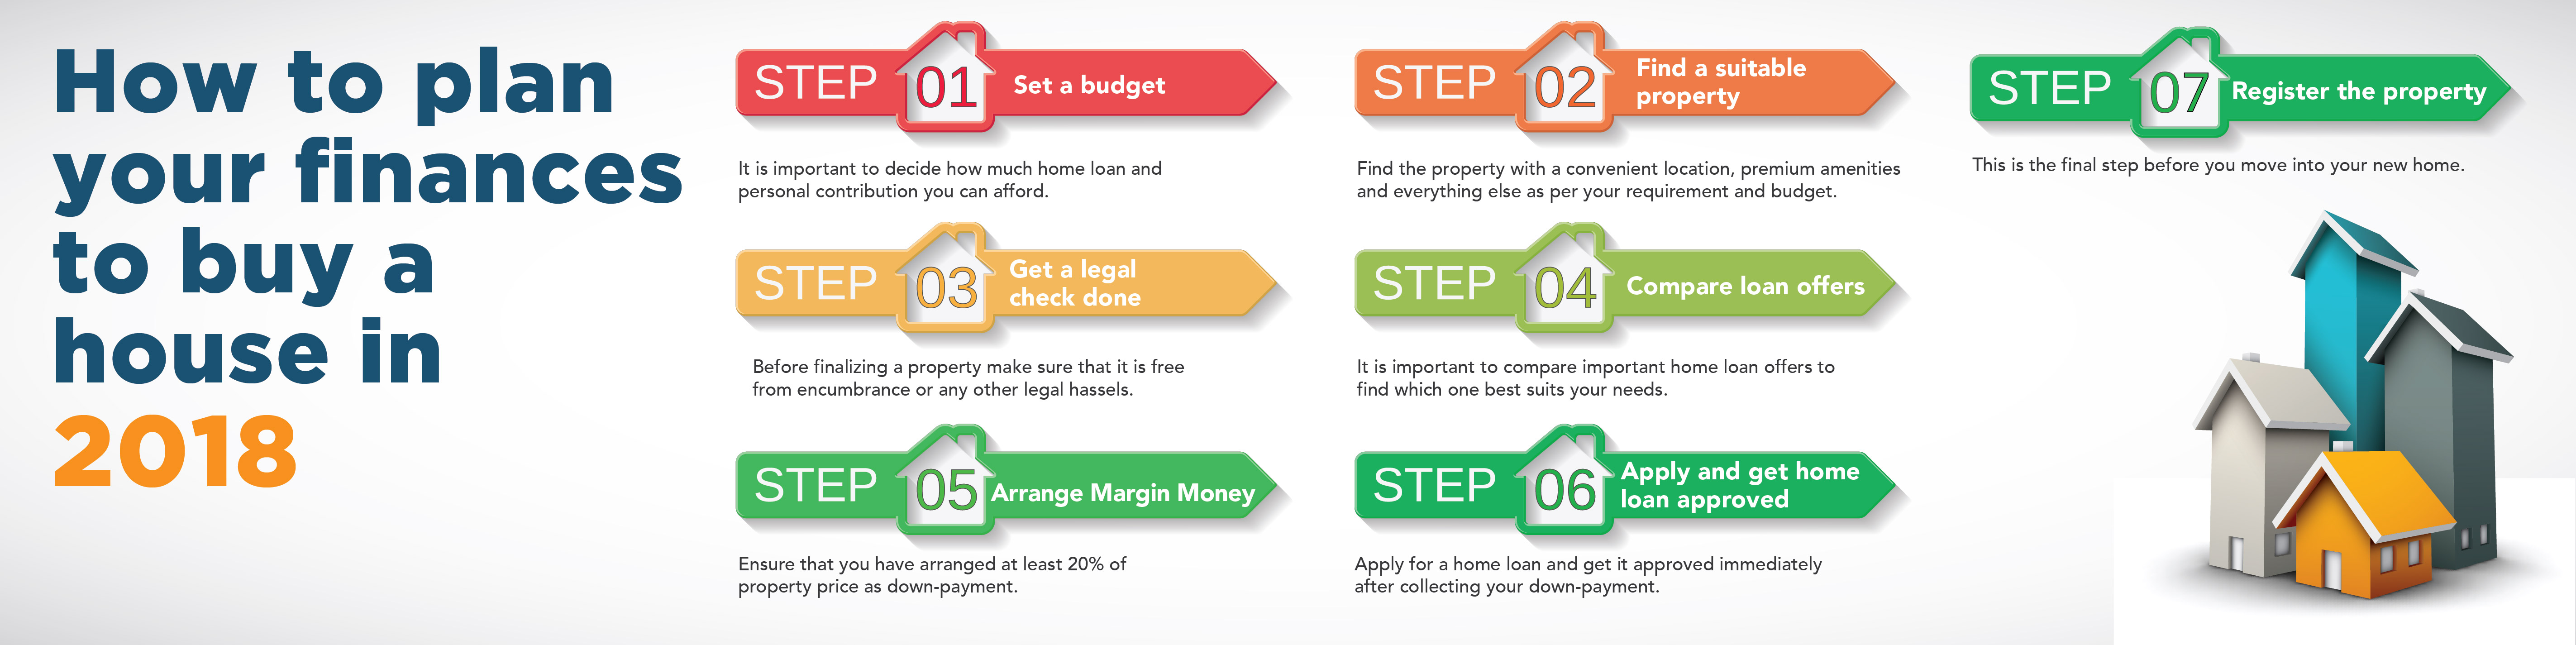 How to plan your finances to buy a house